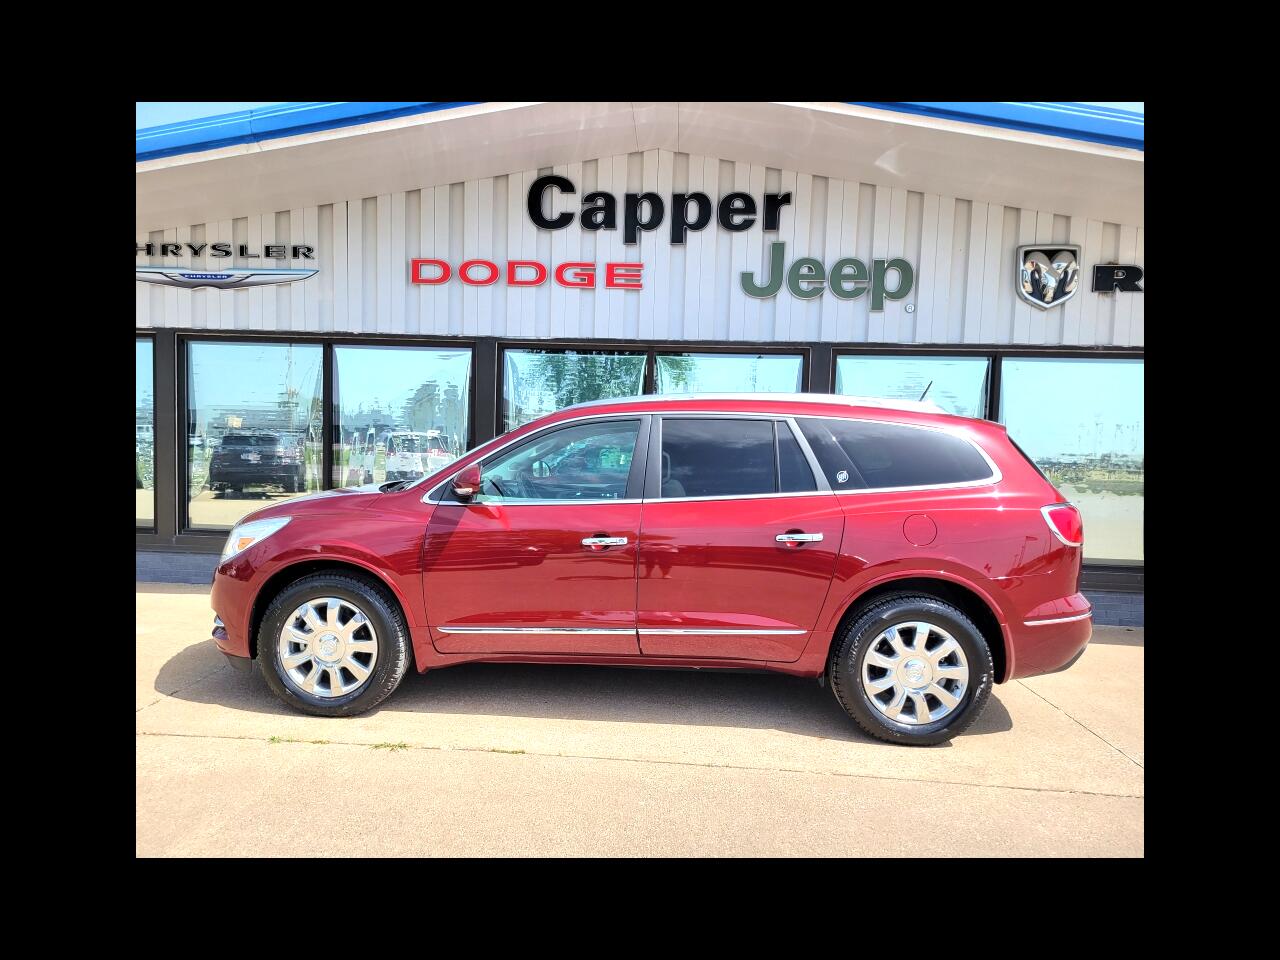 2017 Buick Enclave AWD 4dr Leather